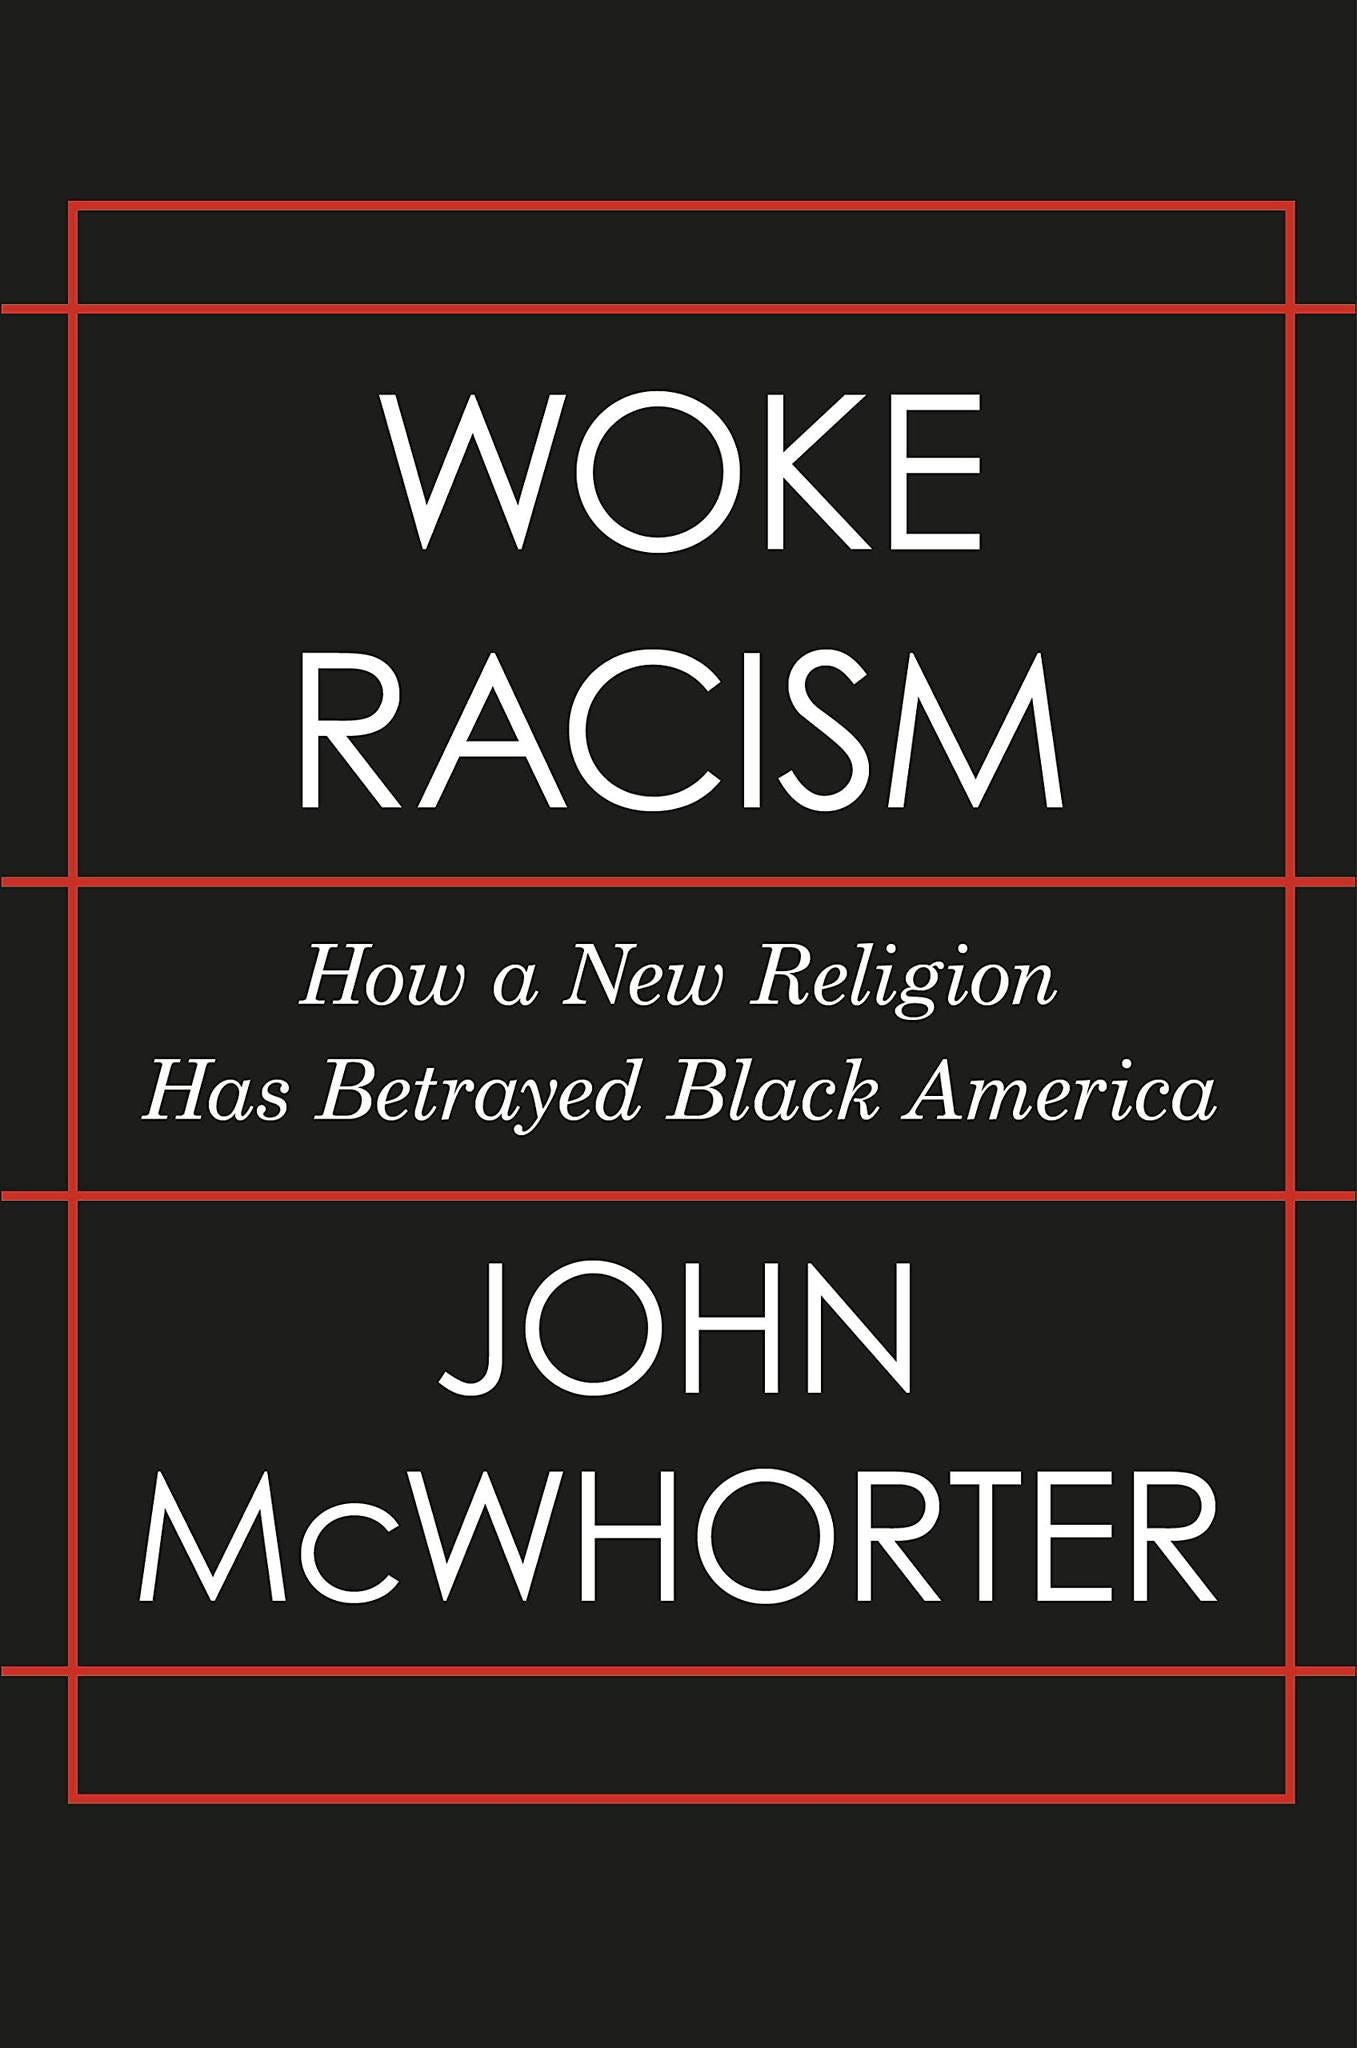 May be an image of text that says 'WOKE RACISM How a New Religion Has Betrayed Black America JOHN McWHORTER'